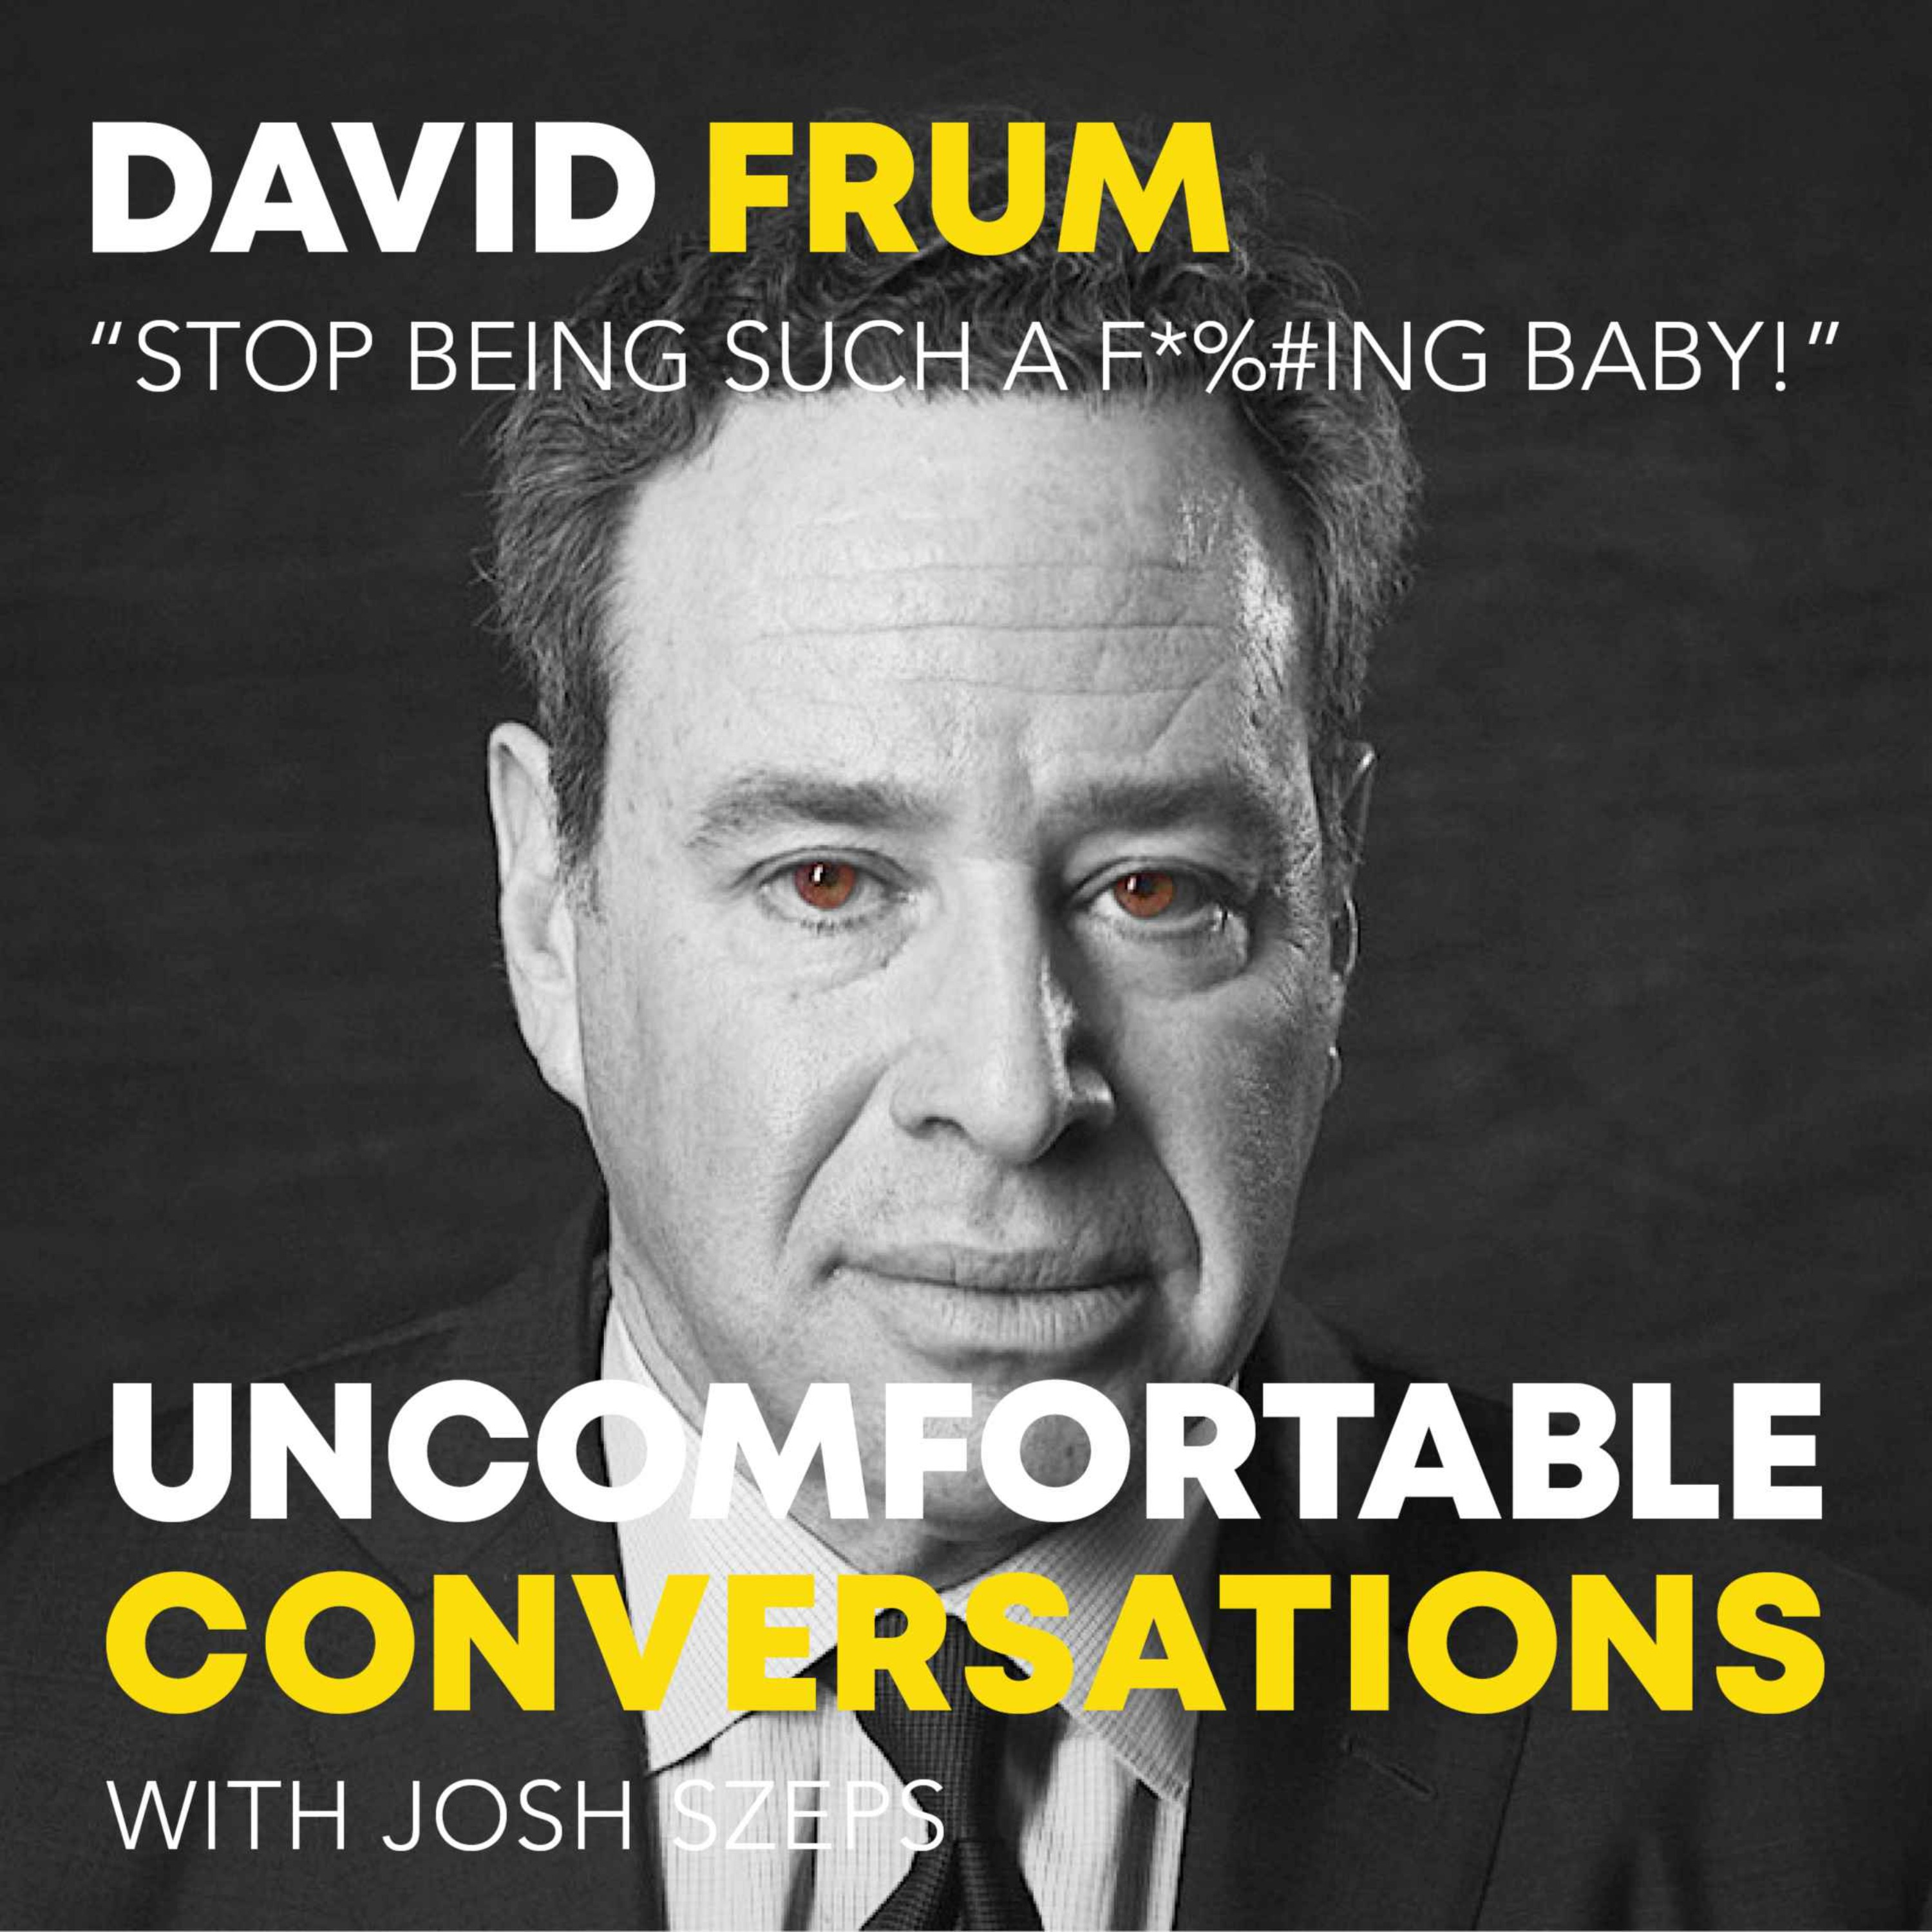 "Stop Being Such a F*%#ing Baby!" with David Frum